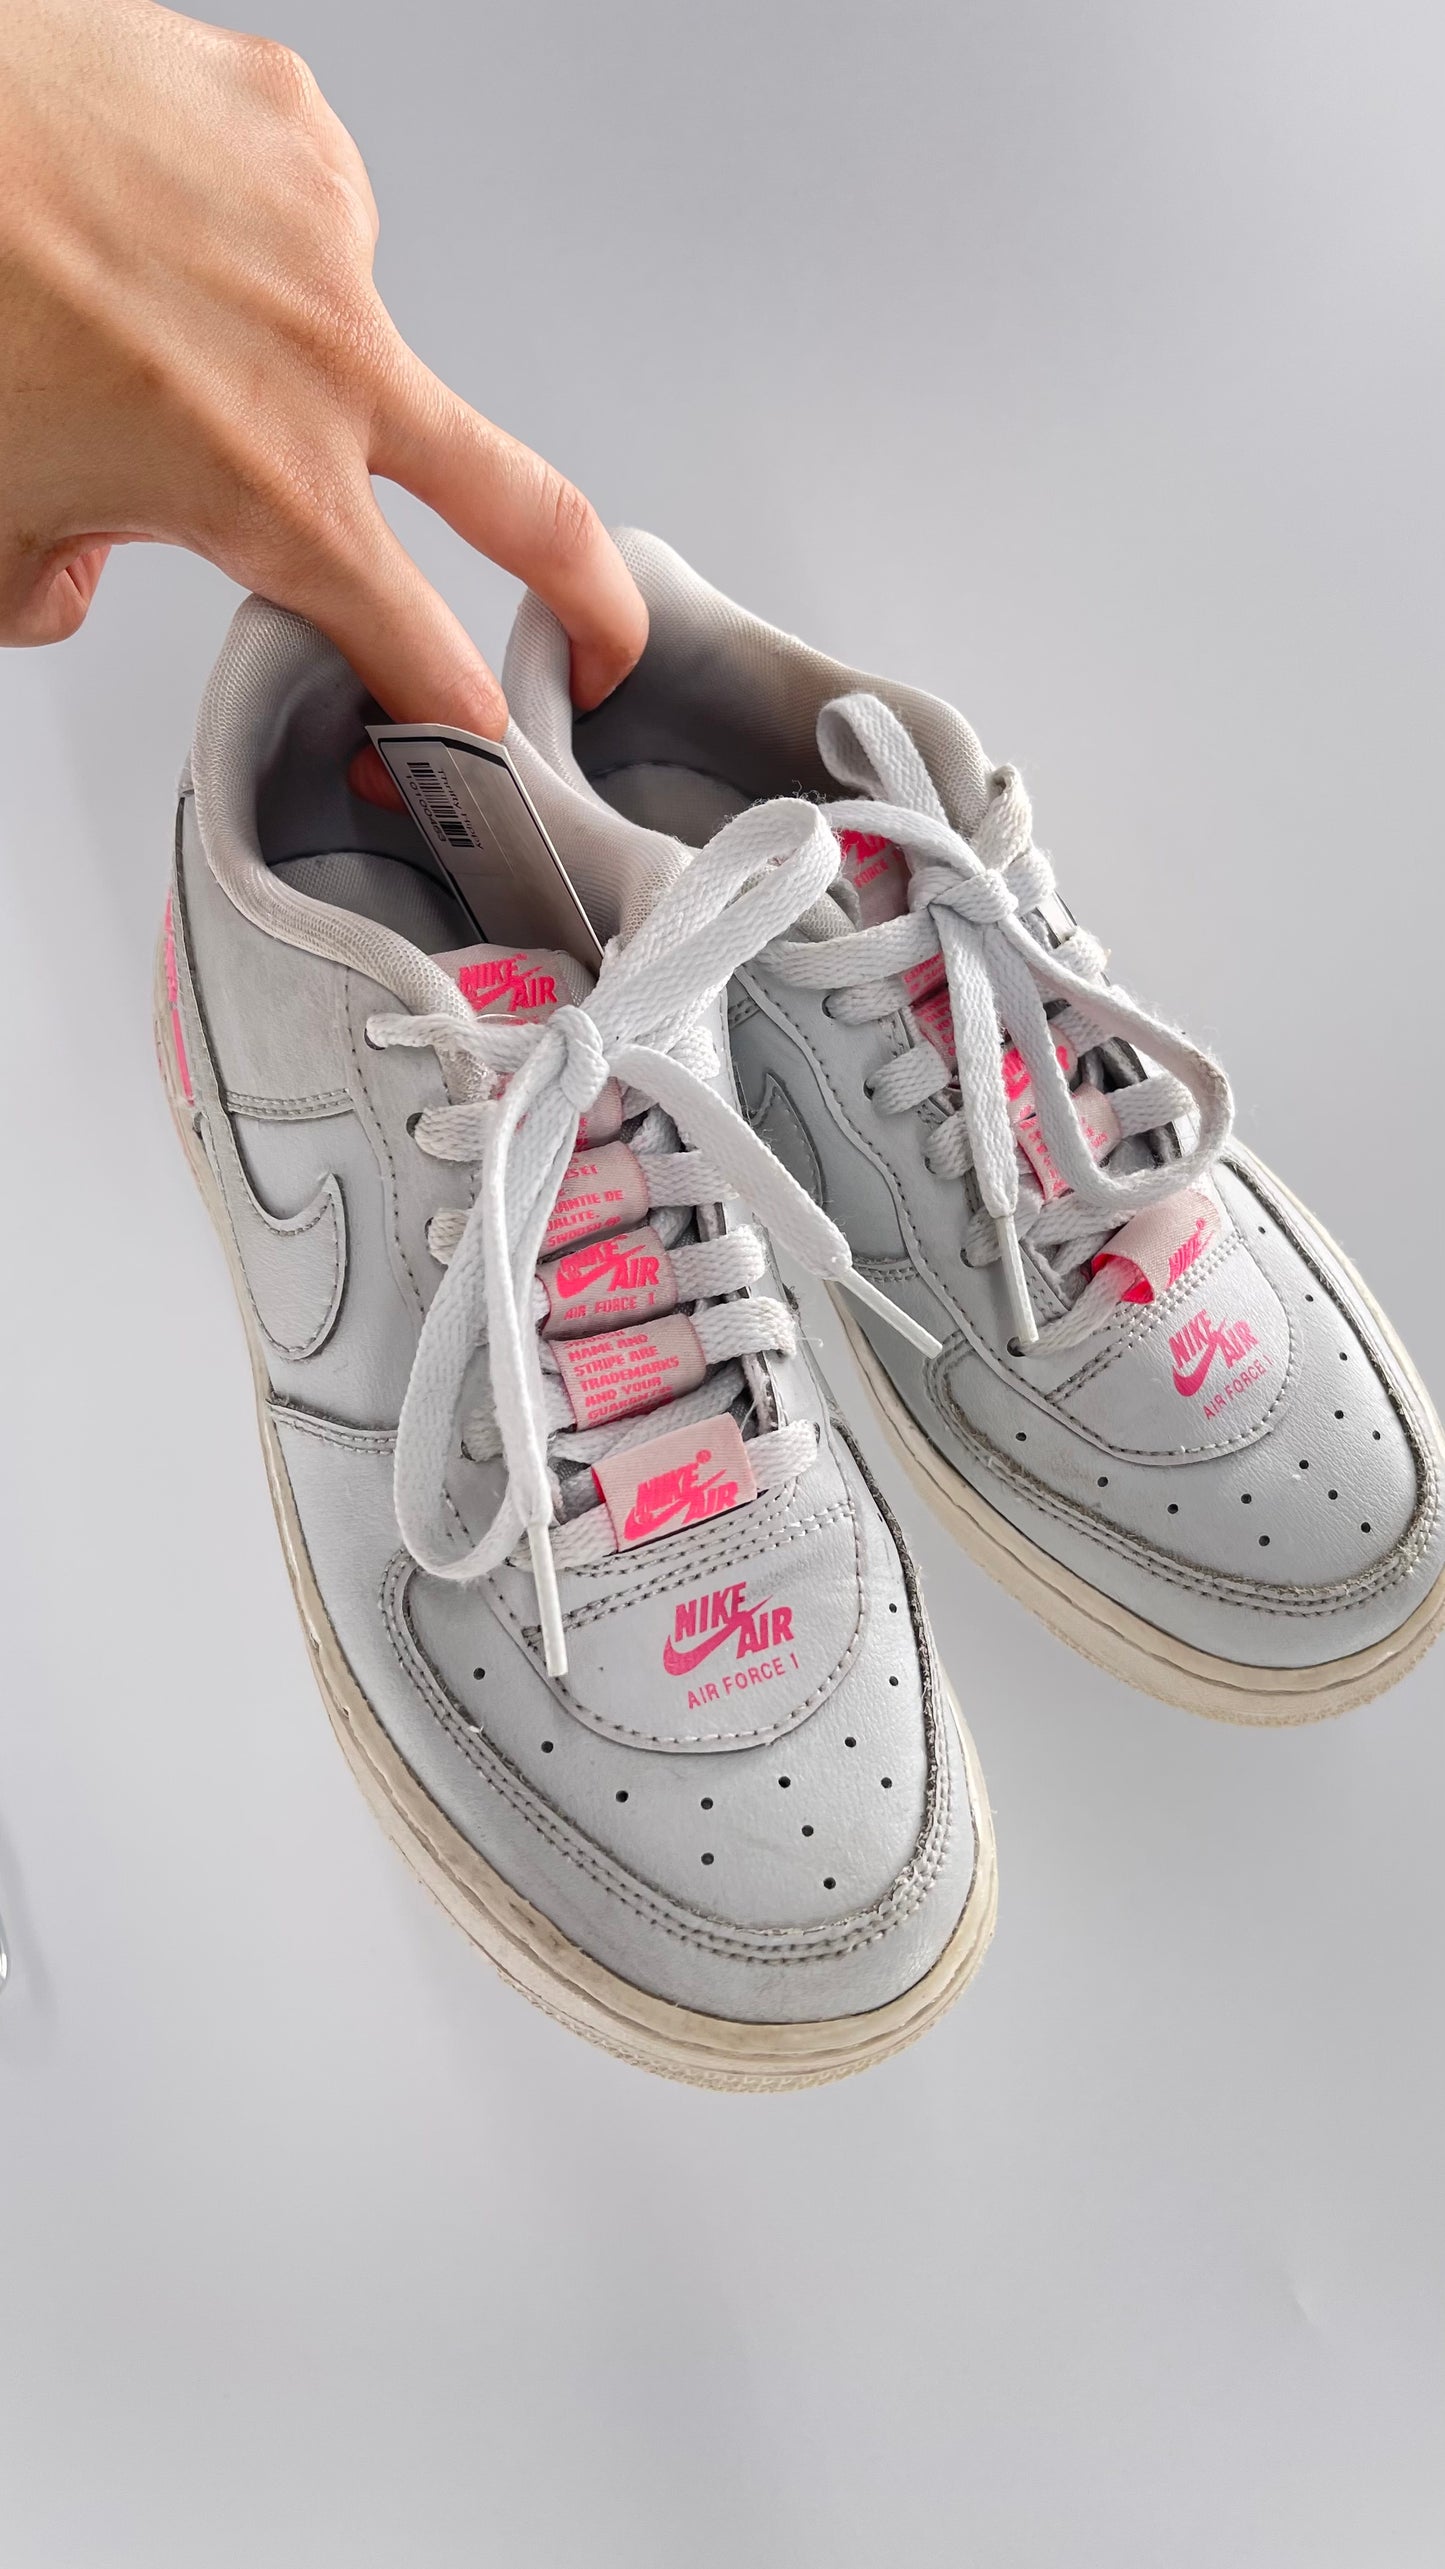 Custom Nikes Worn White with Tags on Laces and Neon Pink Details (4Y)